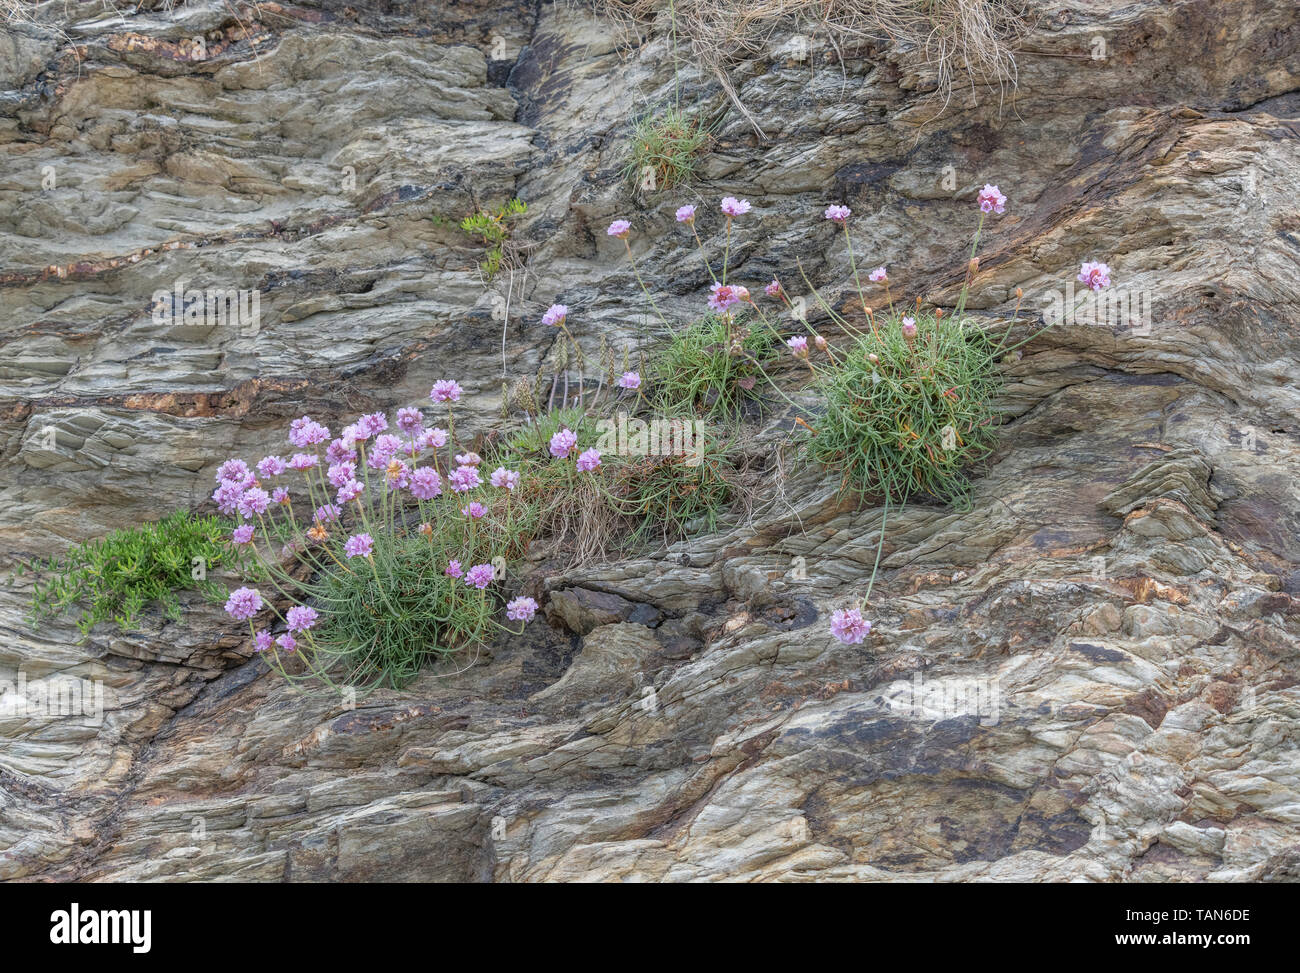 Clustered pink flowers of Thrift / Sea Pink - Armeria maritima - on rock outcrop. Common UK seashore & coastal plant. Wild flower patch. Stock Photo